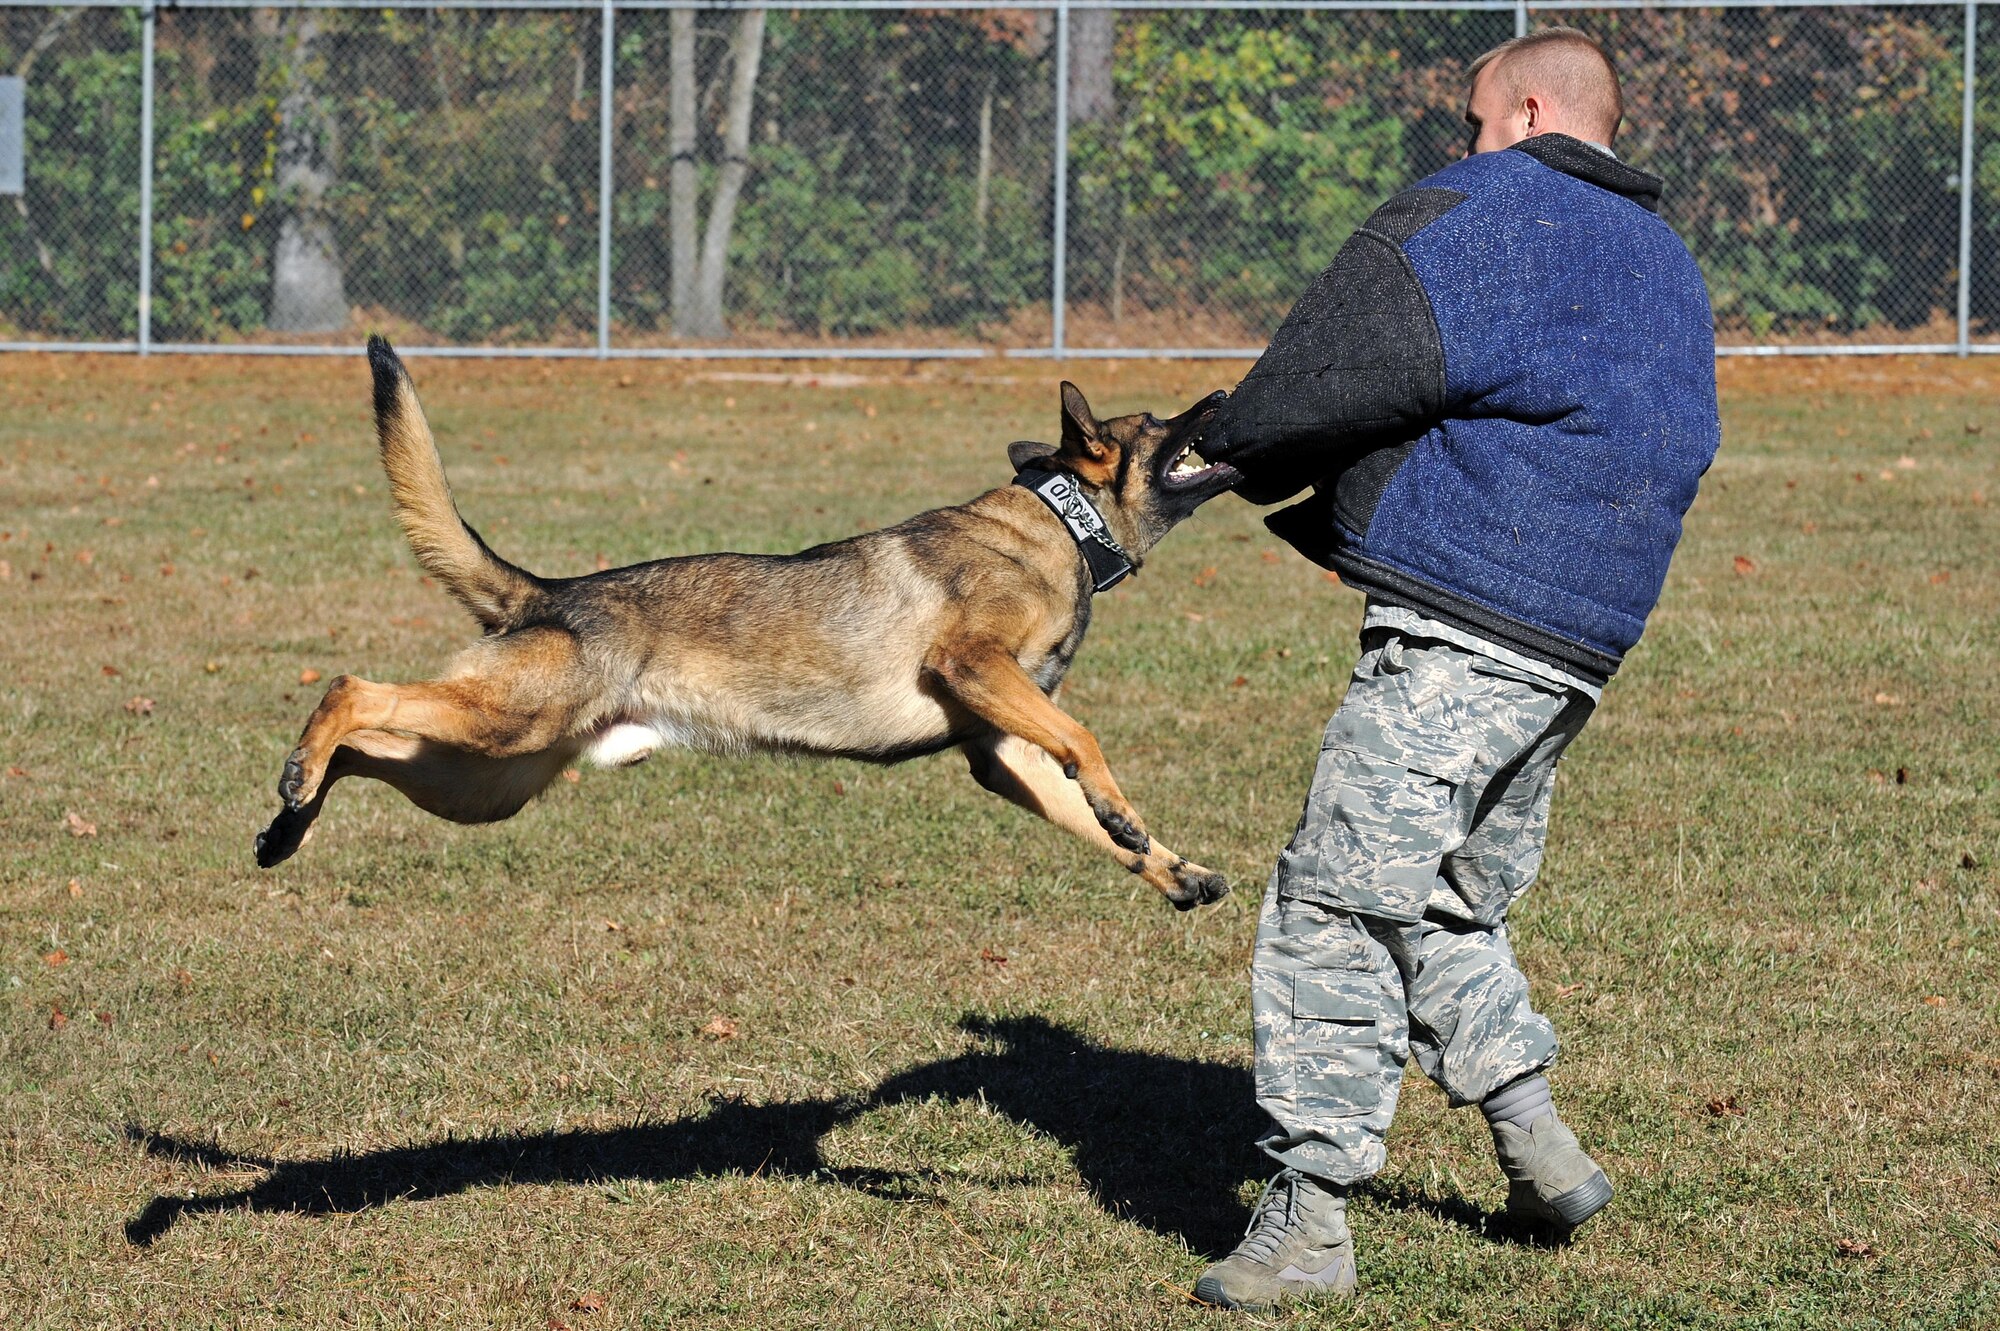 Staff Sgt. Bruce Weir trains Kuli on bite scenarios at Seymour Johnson Air Force Base, N.C., Nov. 14, 2013. Upon arrival in August, Kuli, the squadron’s newest narcotics dog, immediately began advanced training in preparation for patrols. Weir is a 4th Security Forces Squadron military working dog (MWD) handler 